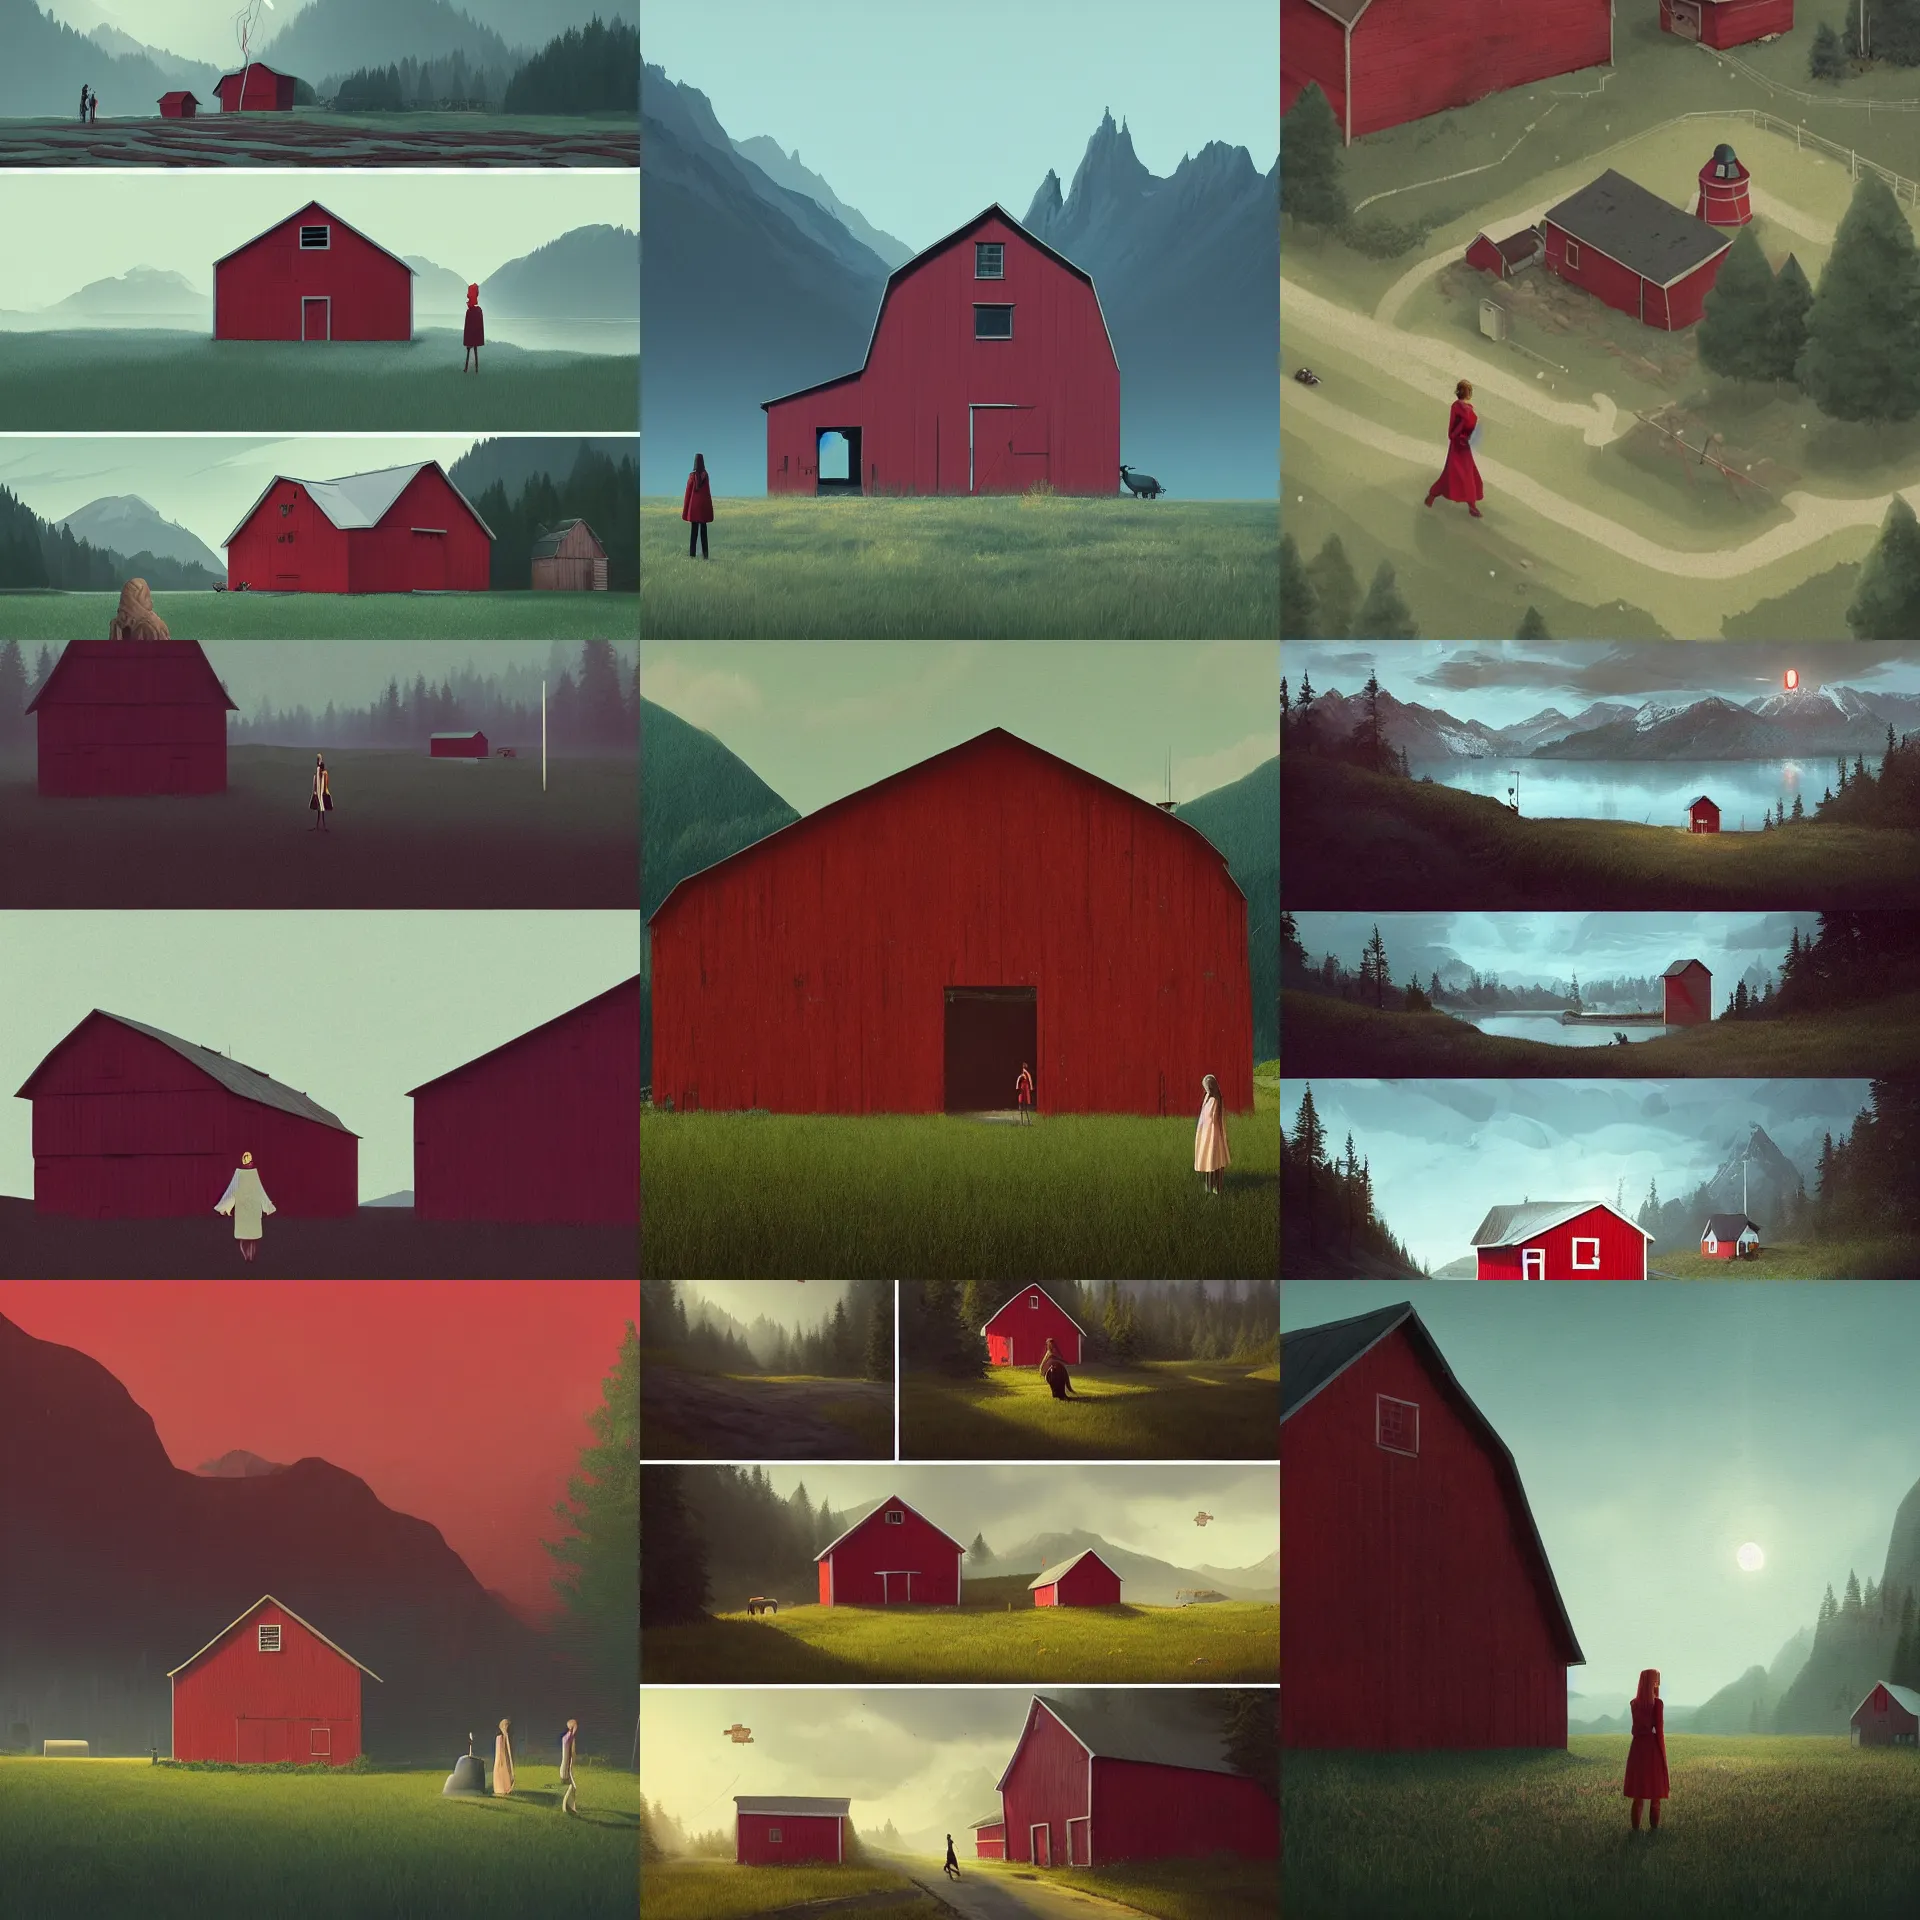 Prompt: simon stalenhag. composition : long shot. style : digital art ; concept ; mysterious ; 4 k. scenery : a sunny fjord with a lone gabled roof red barn. subject : a young woman with long black hair wearing a white dress. action : the woman is hiding inside the barn.